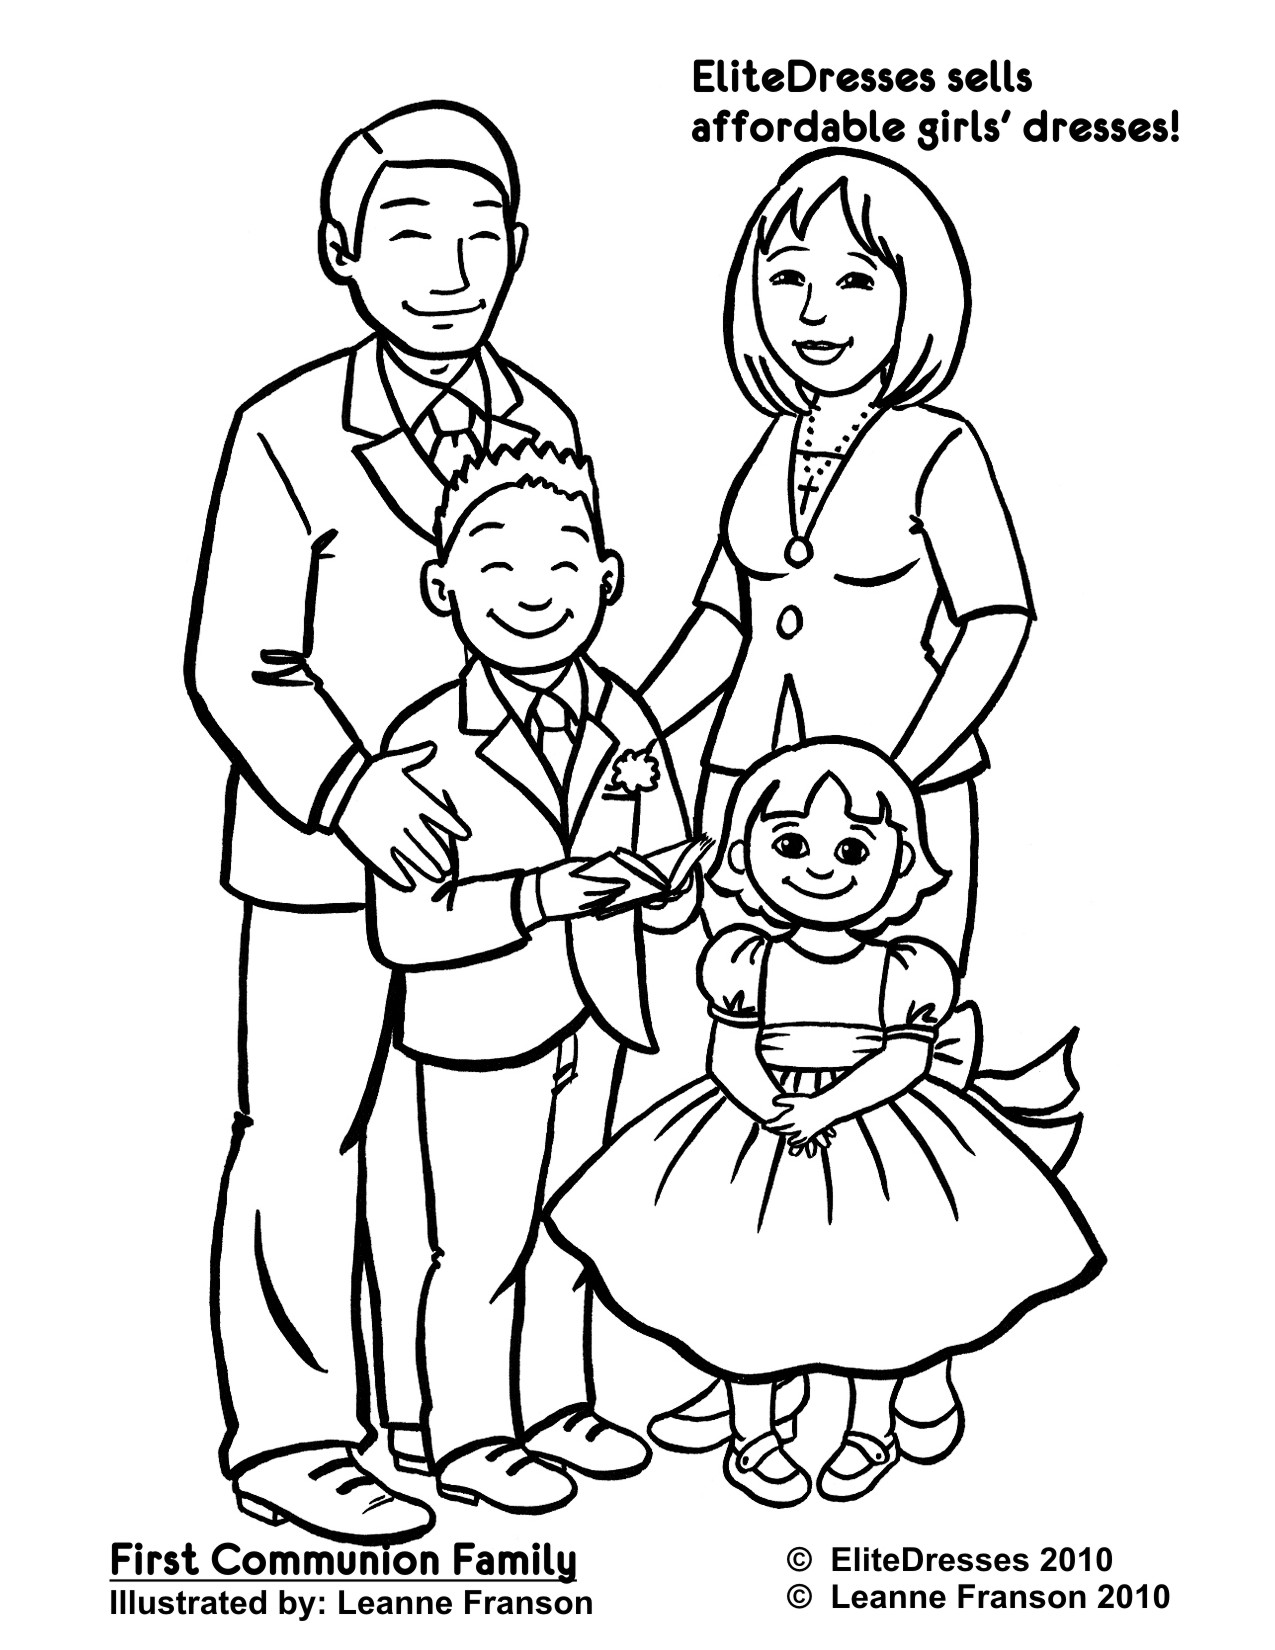 Me And My Family Coloring Pages At Getcolorings.com | Free Printable